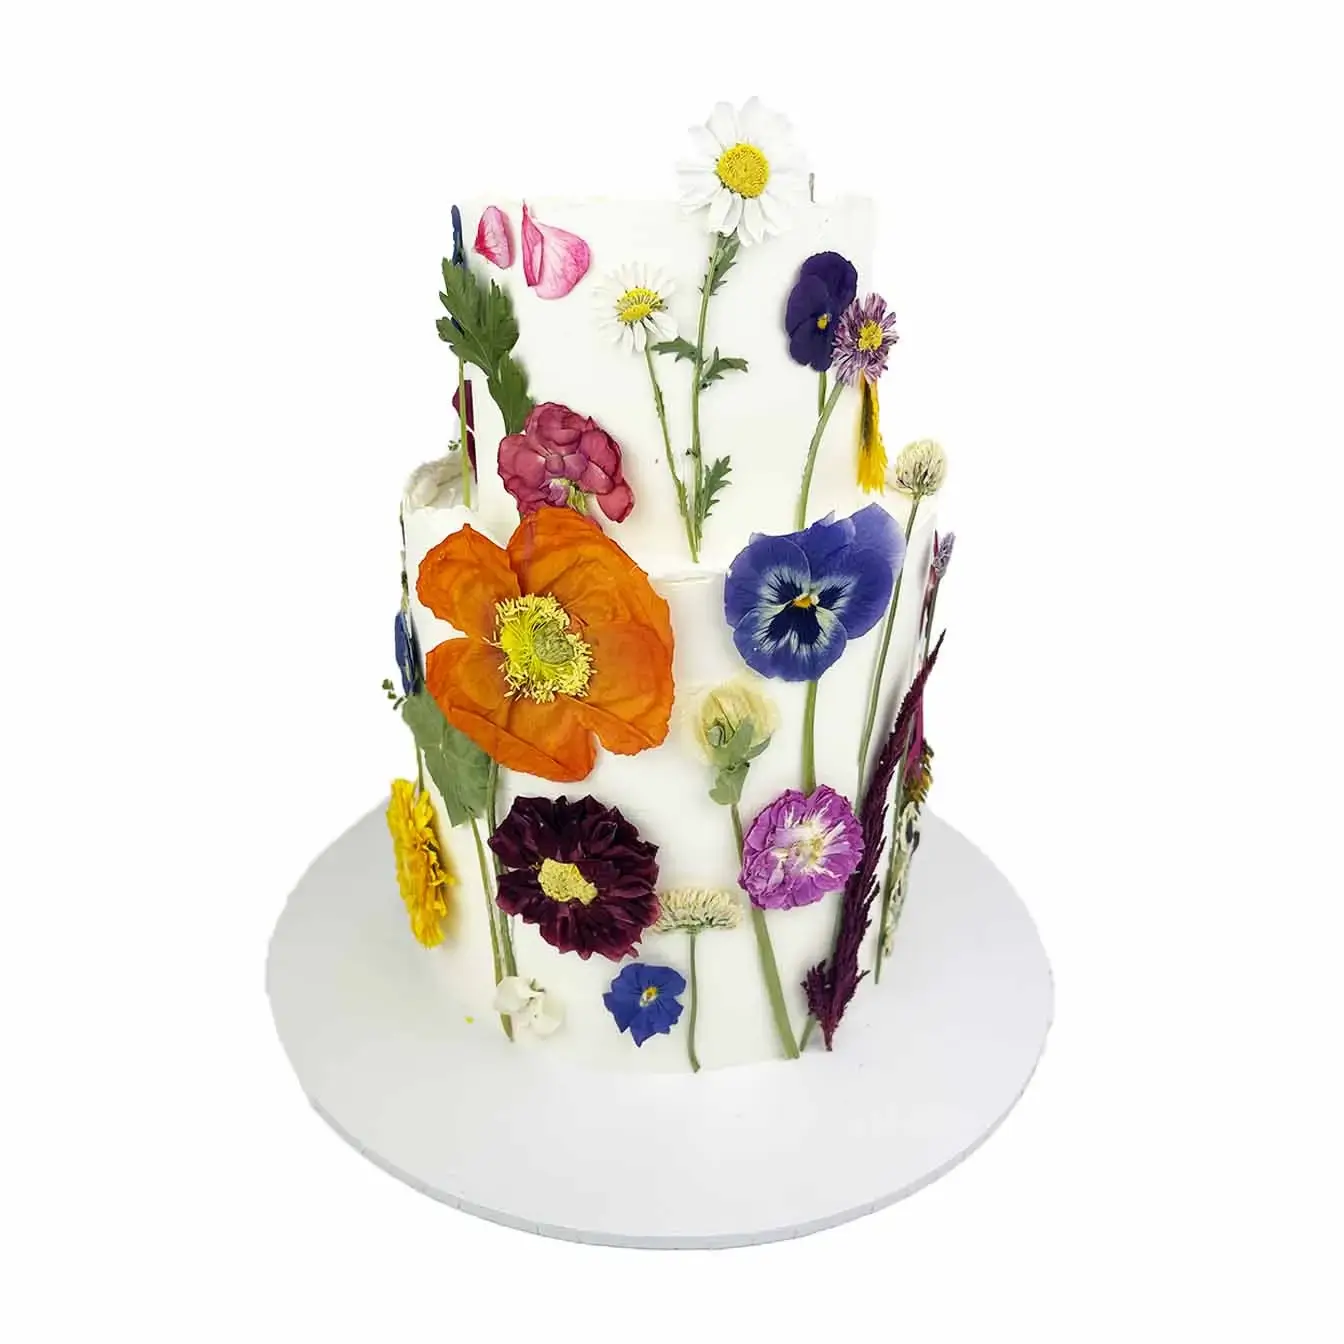 Rustic Elegance Floral Cake - A two-tier cake with a rough edge design adorned with delicate freeze-dried pressed flowers, a captivating centerpiece celebrating the charm of nature and rustic elegance.